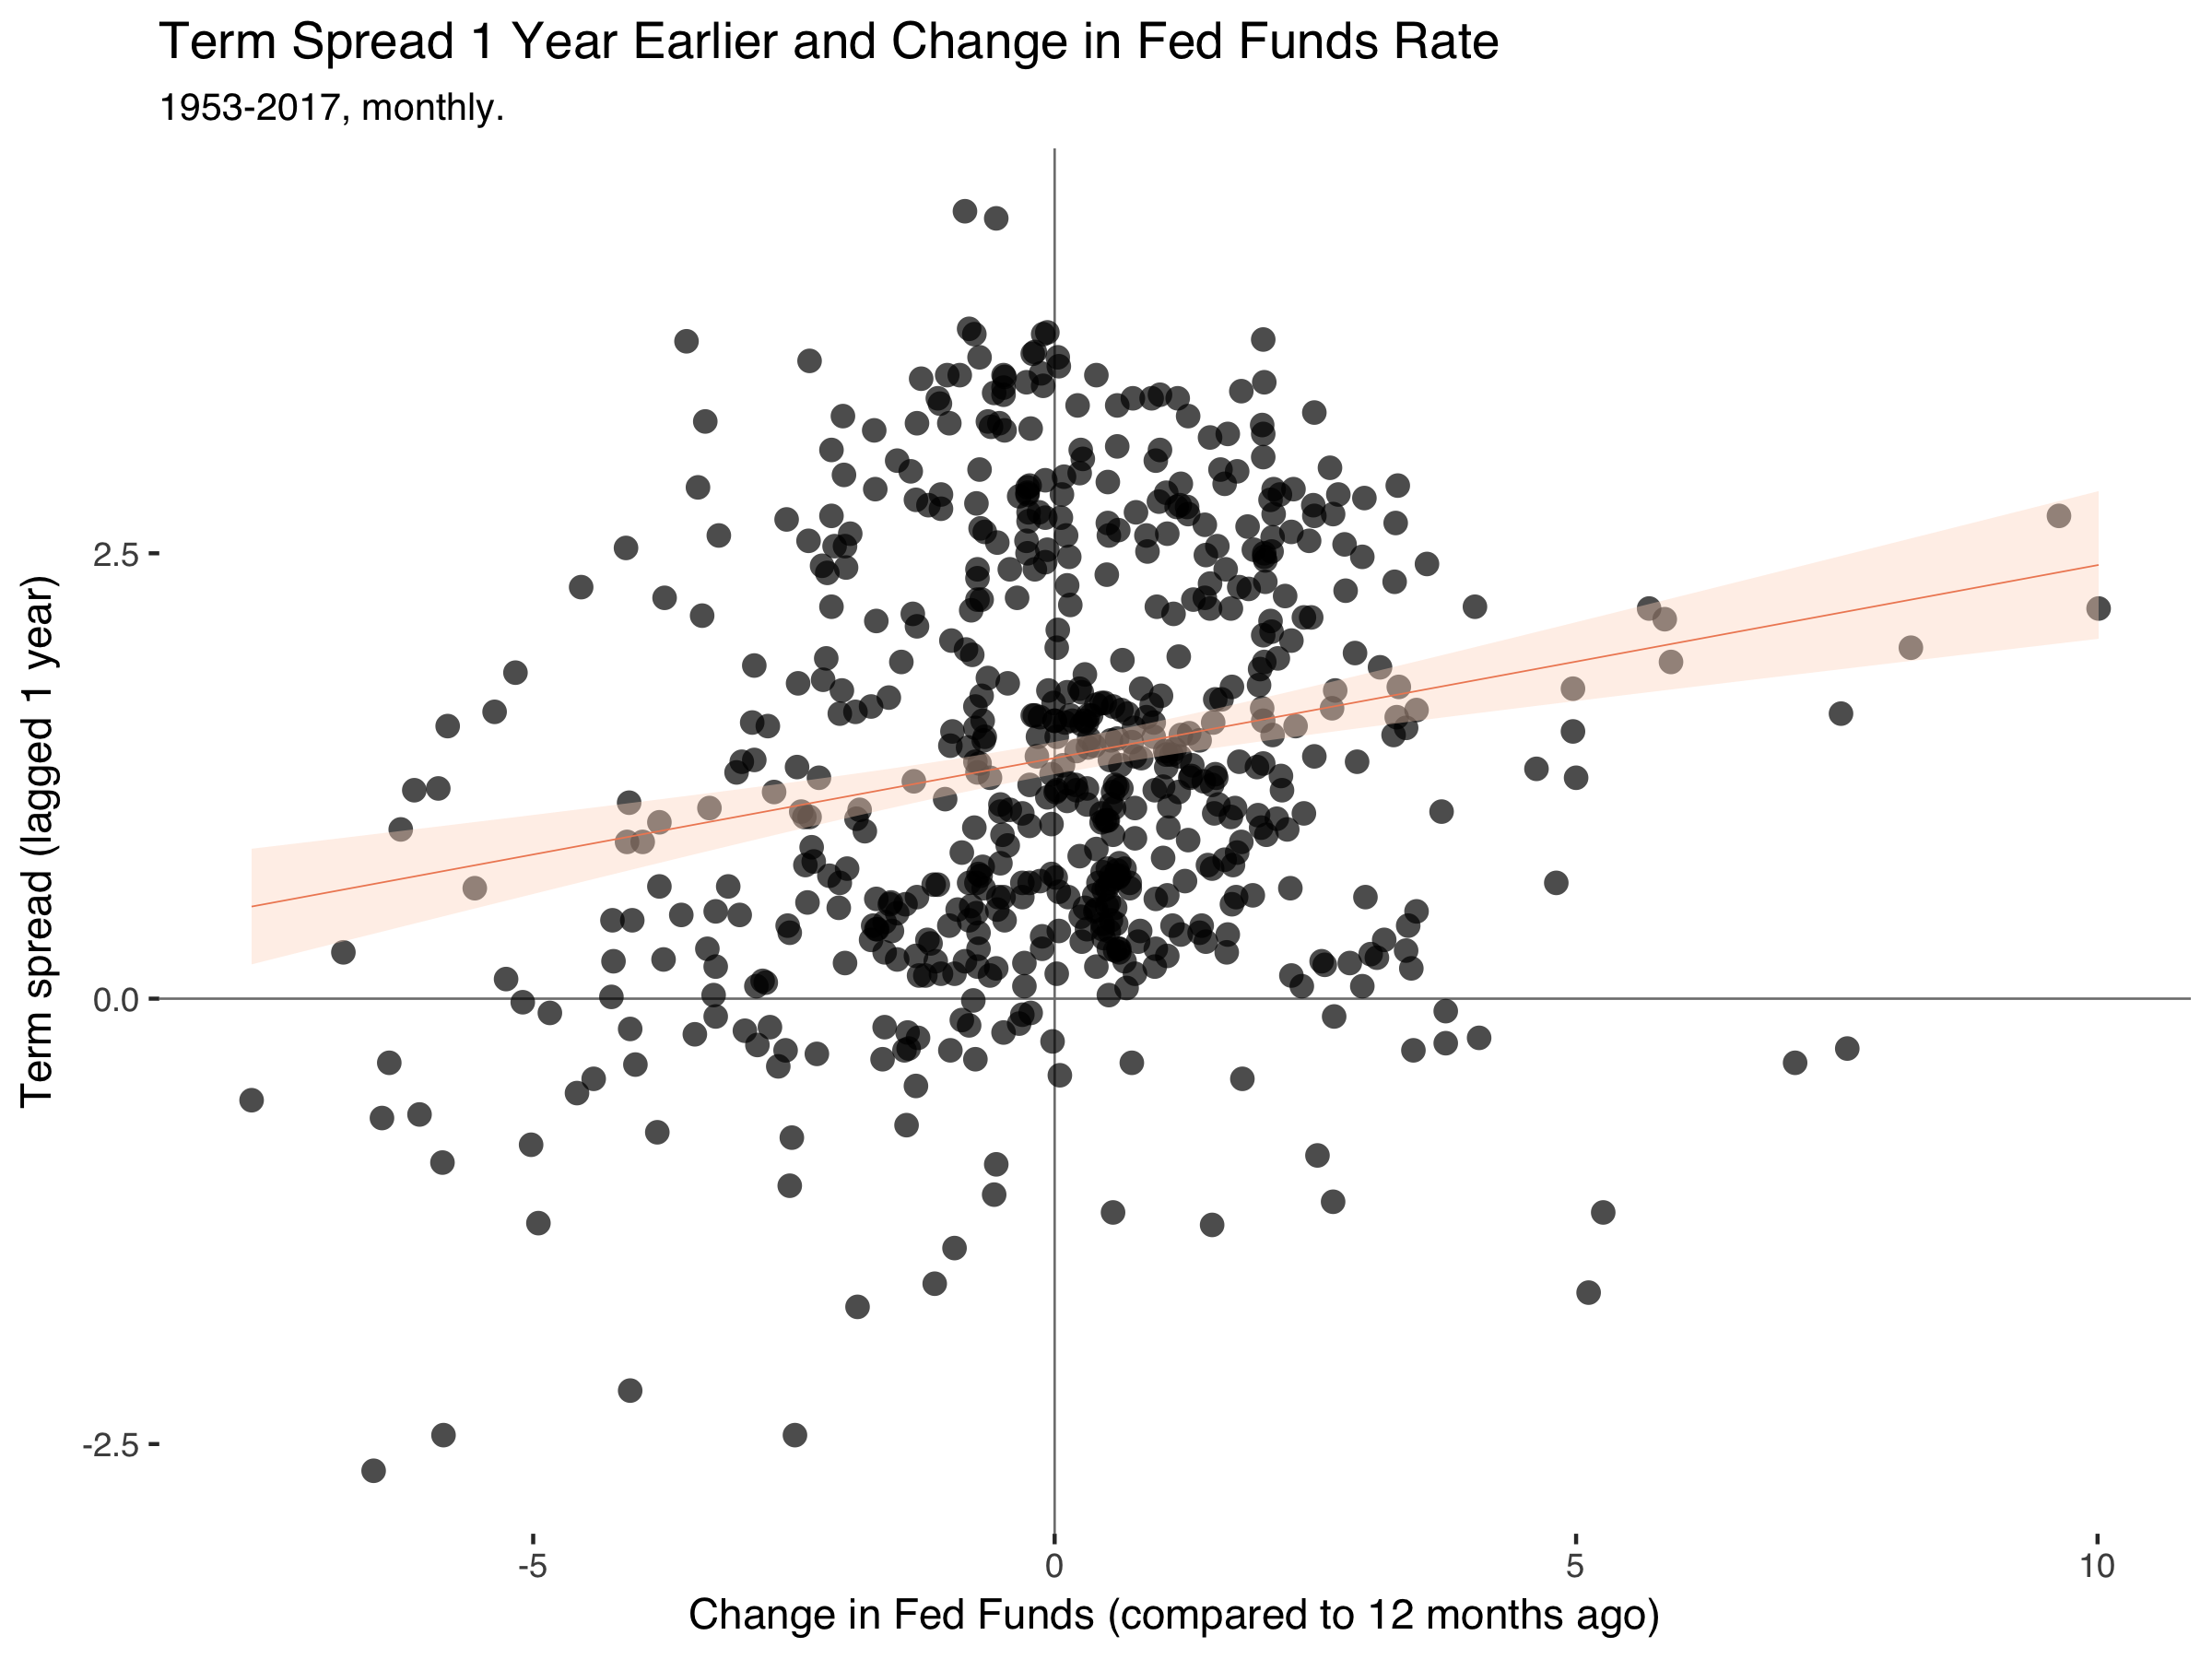 Term spread against changes in the Fed Funds rate